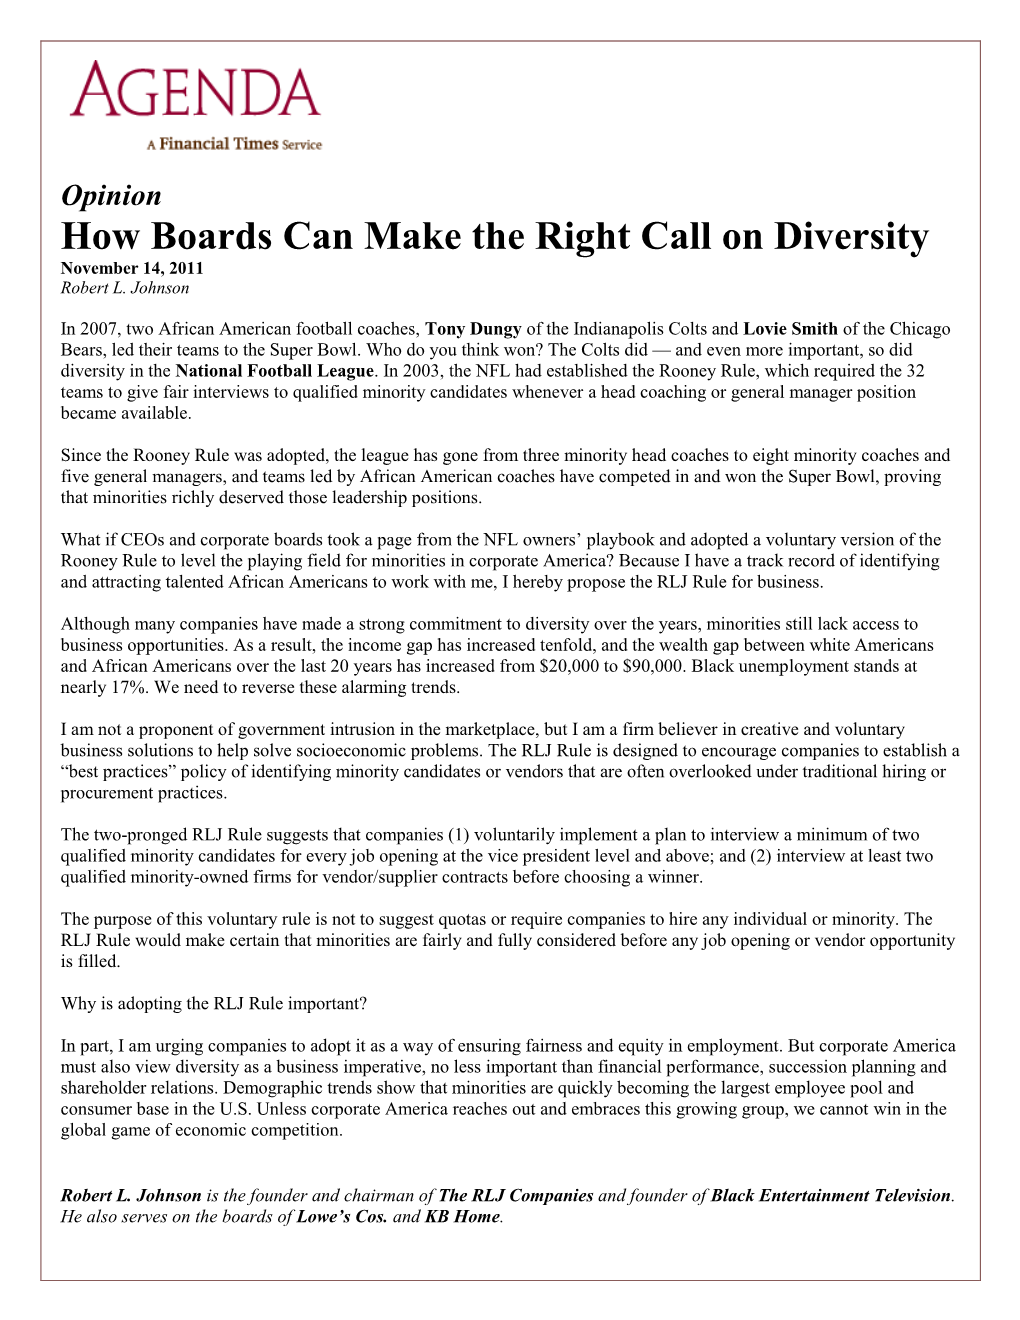 How Boards Can Make the Right Call on Diversity November 14, 2011 Robert L